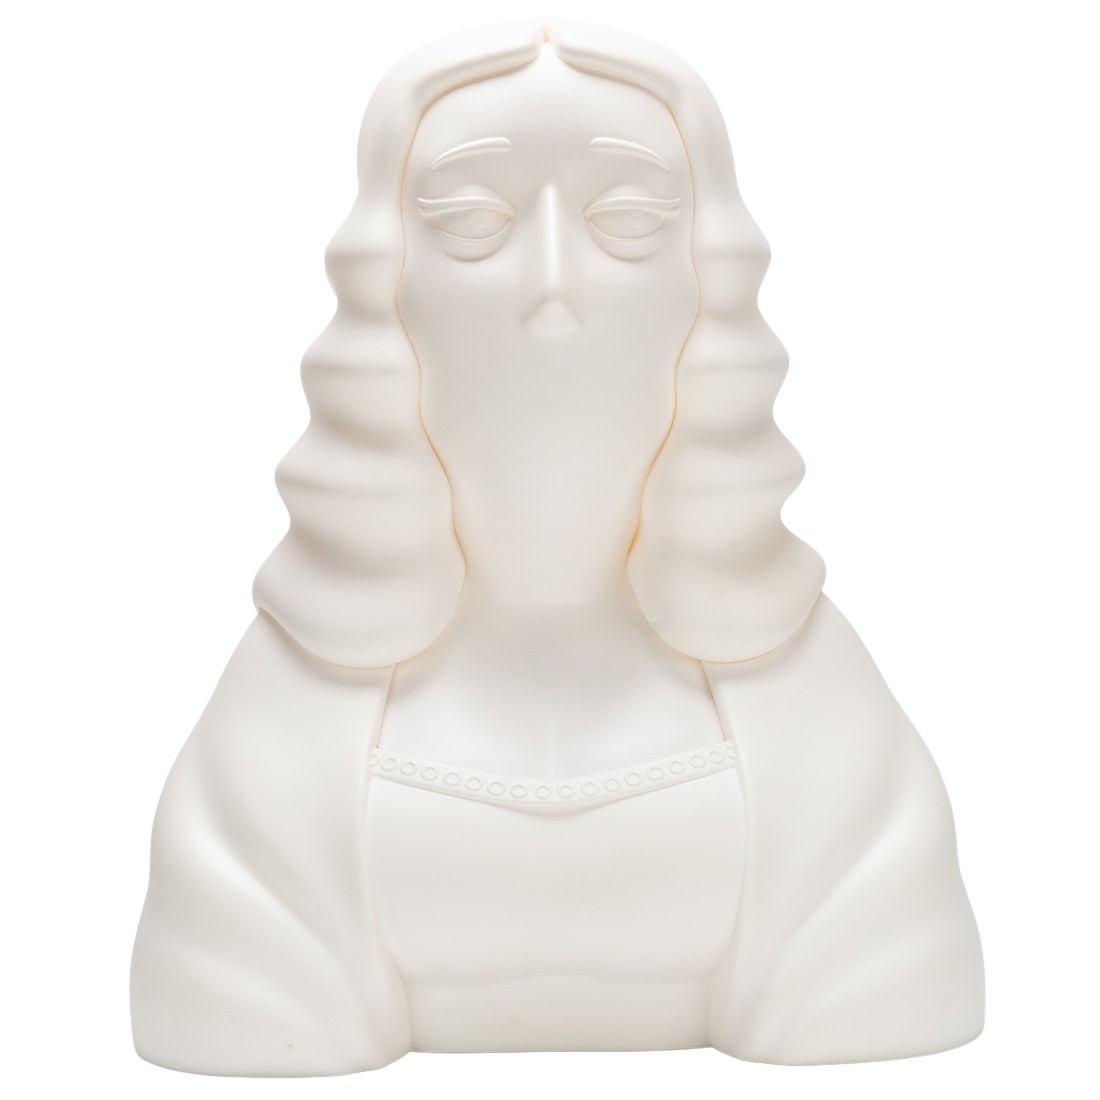 BAIT x Switch Collectibles x Louvre Mambo Lisa All White Statue - Limited Edition of 40 (white)